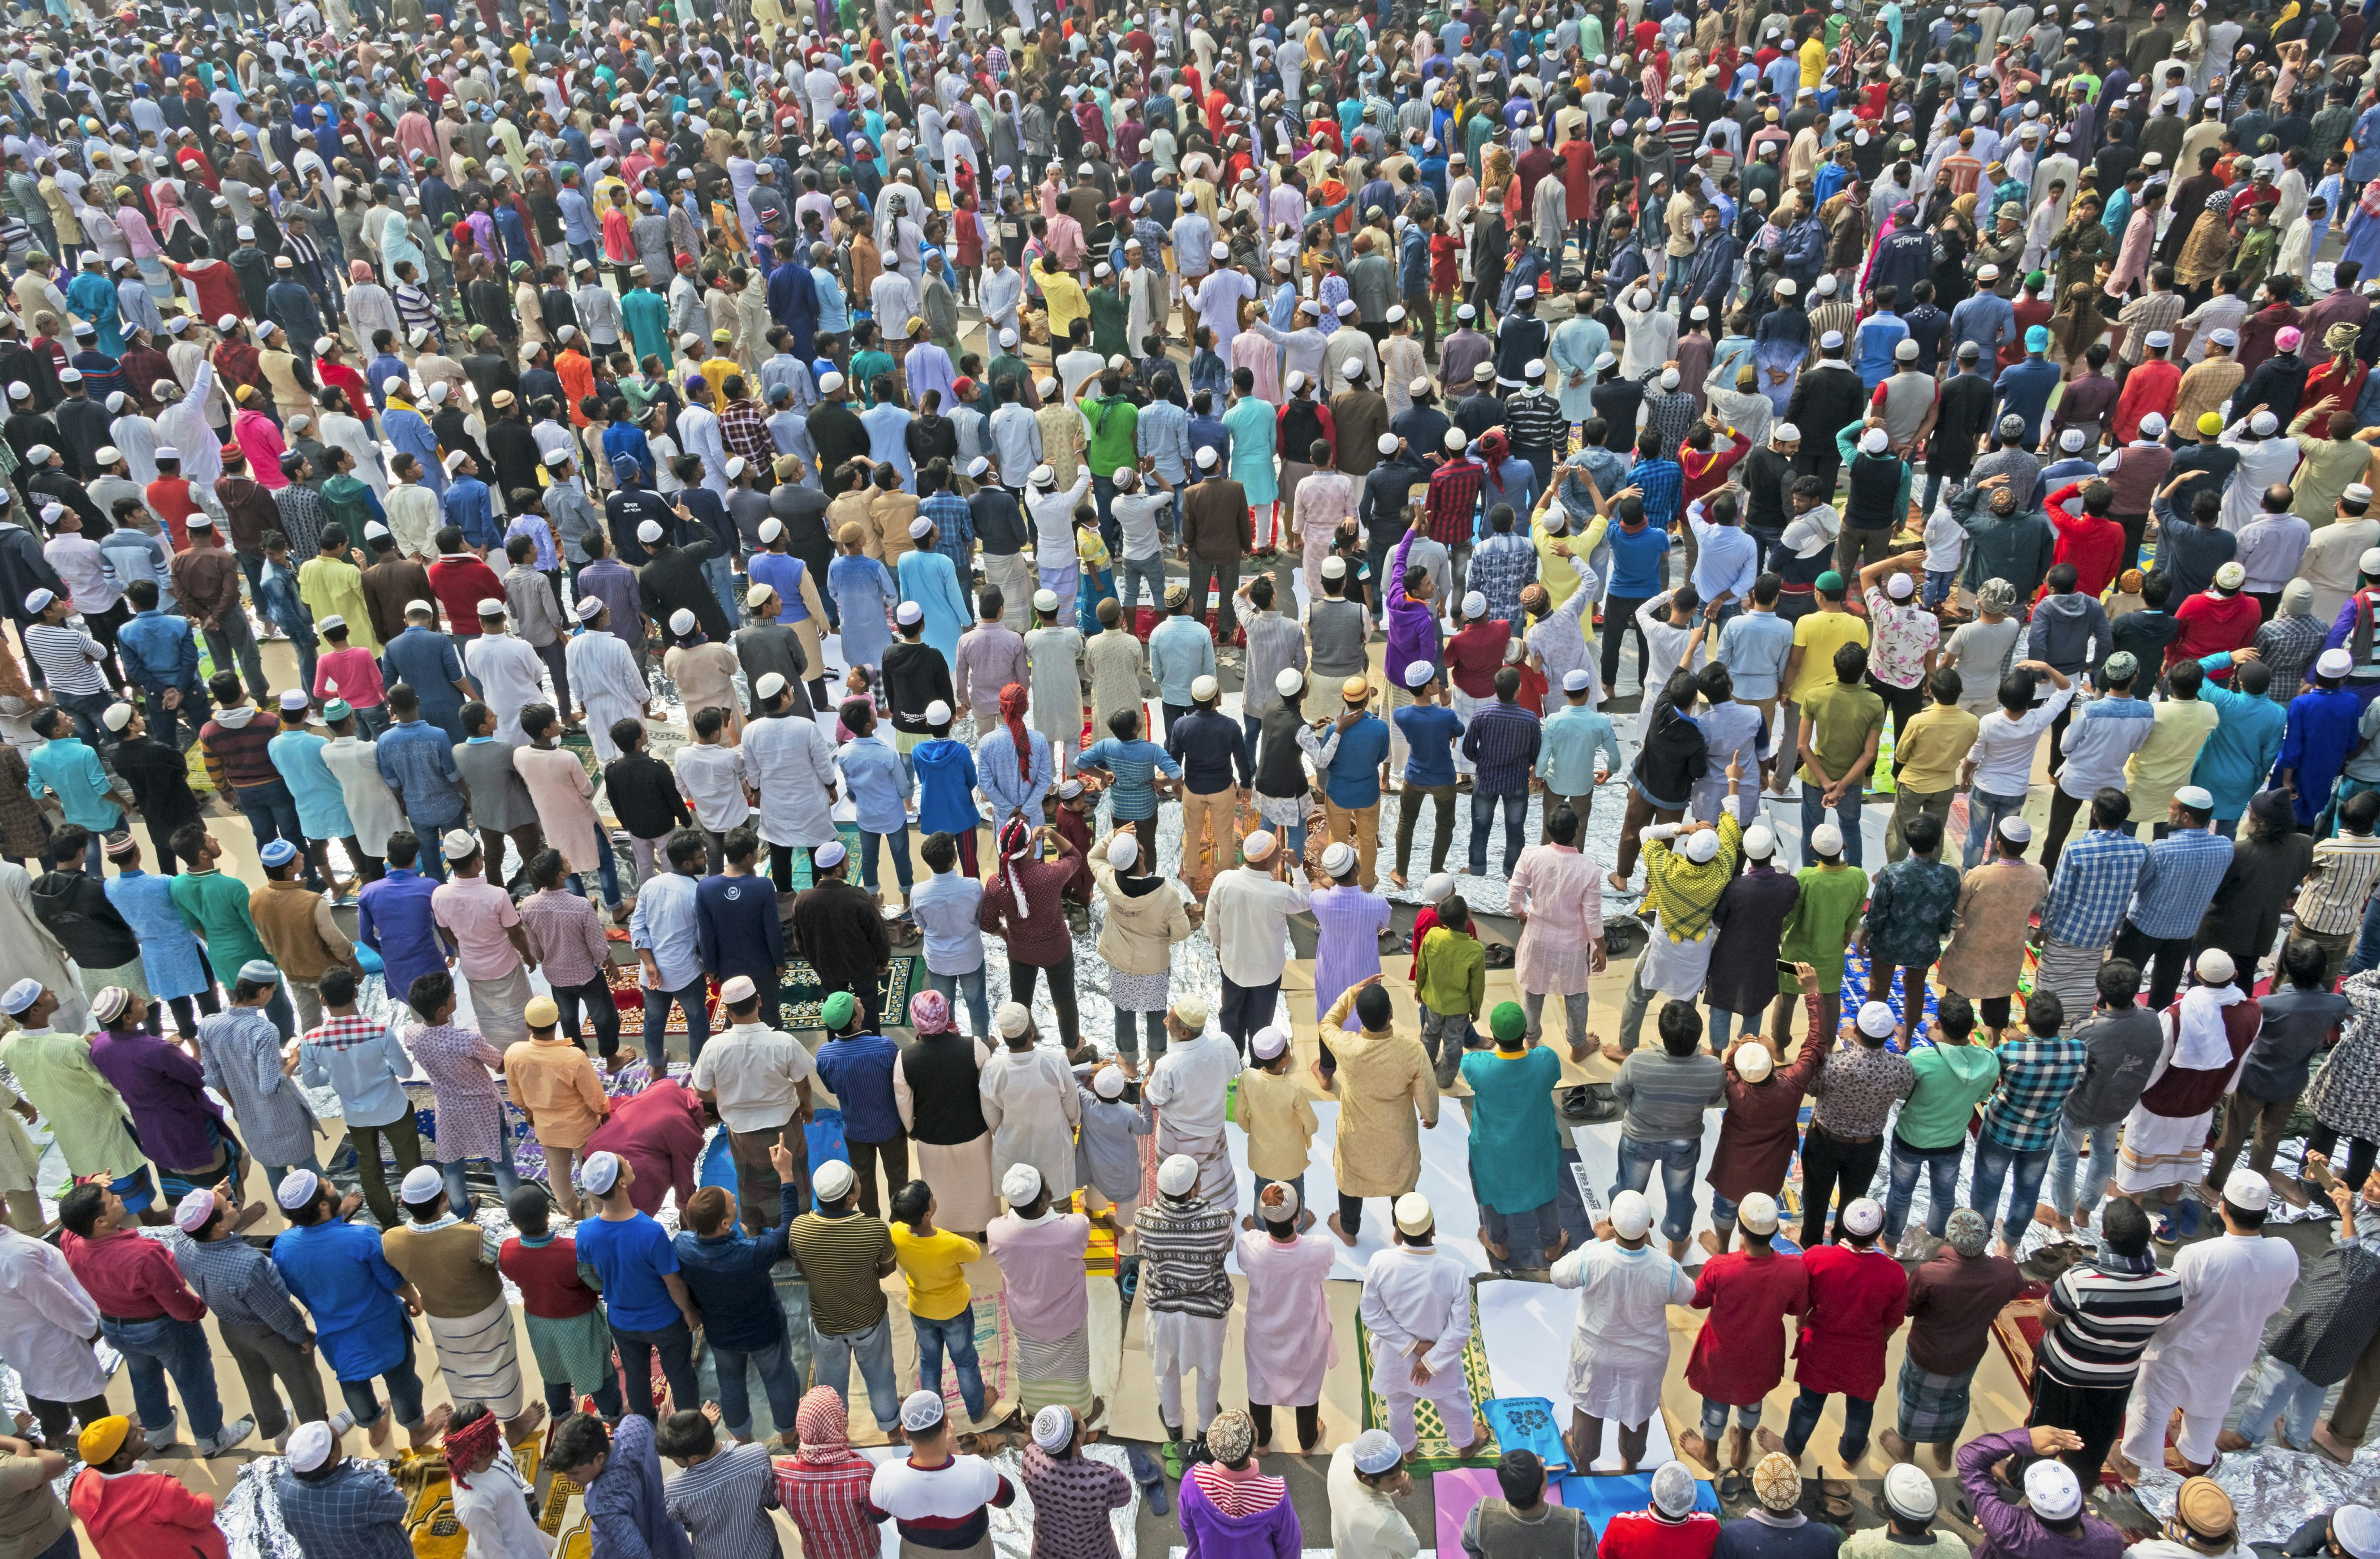 An aerial view of a huge crowd of worshippers outside a mosque in Dakar, which creates a colourful scene.